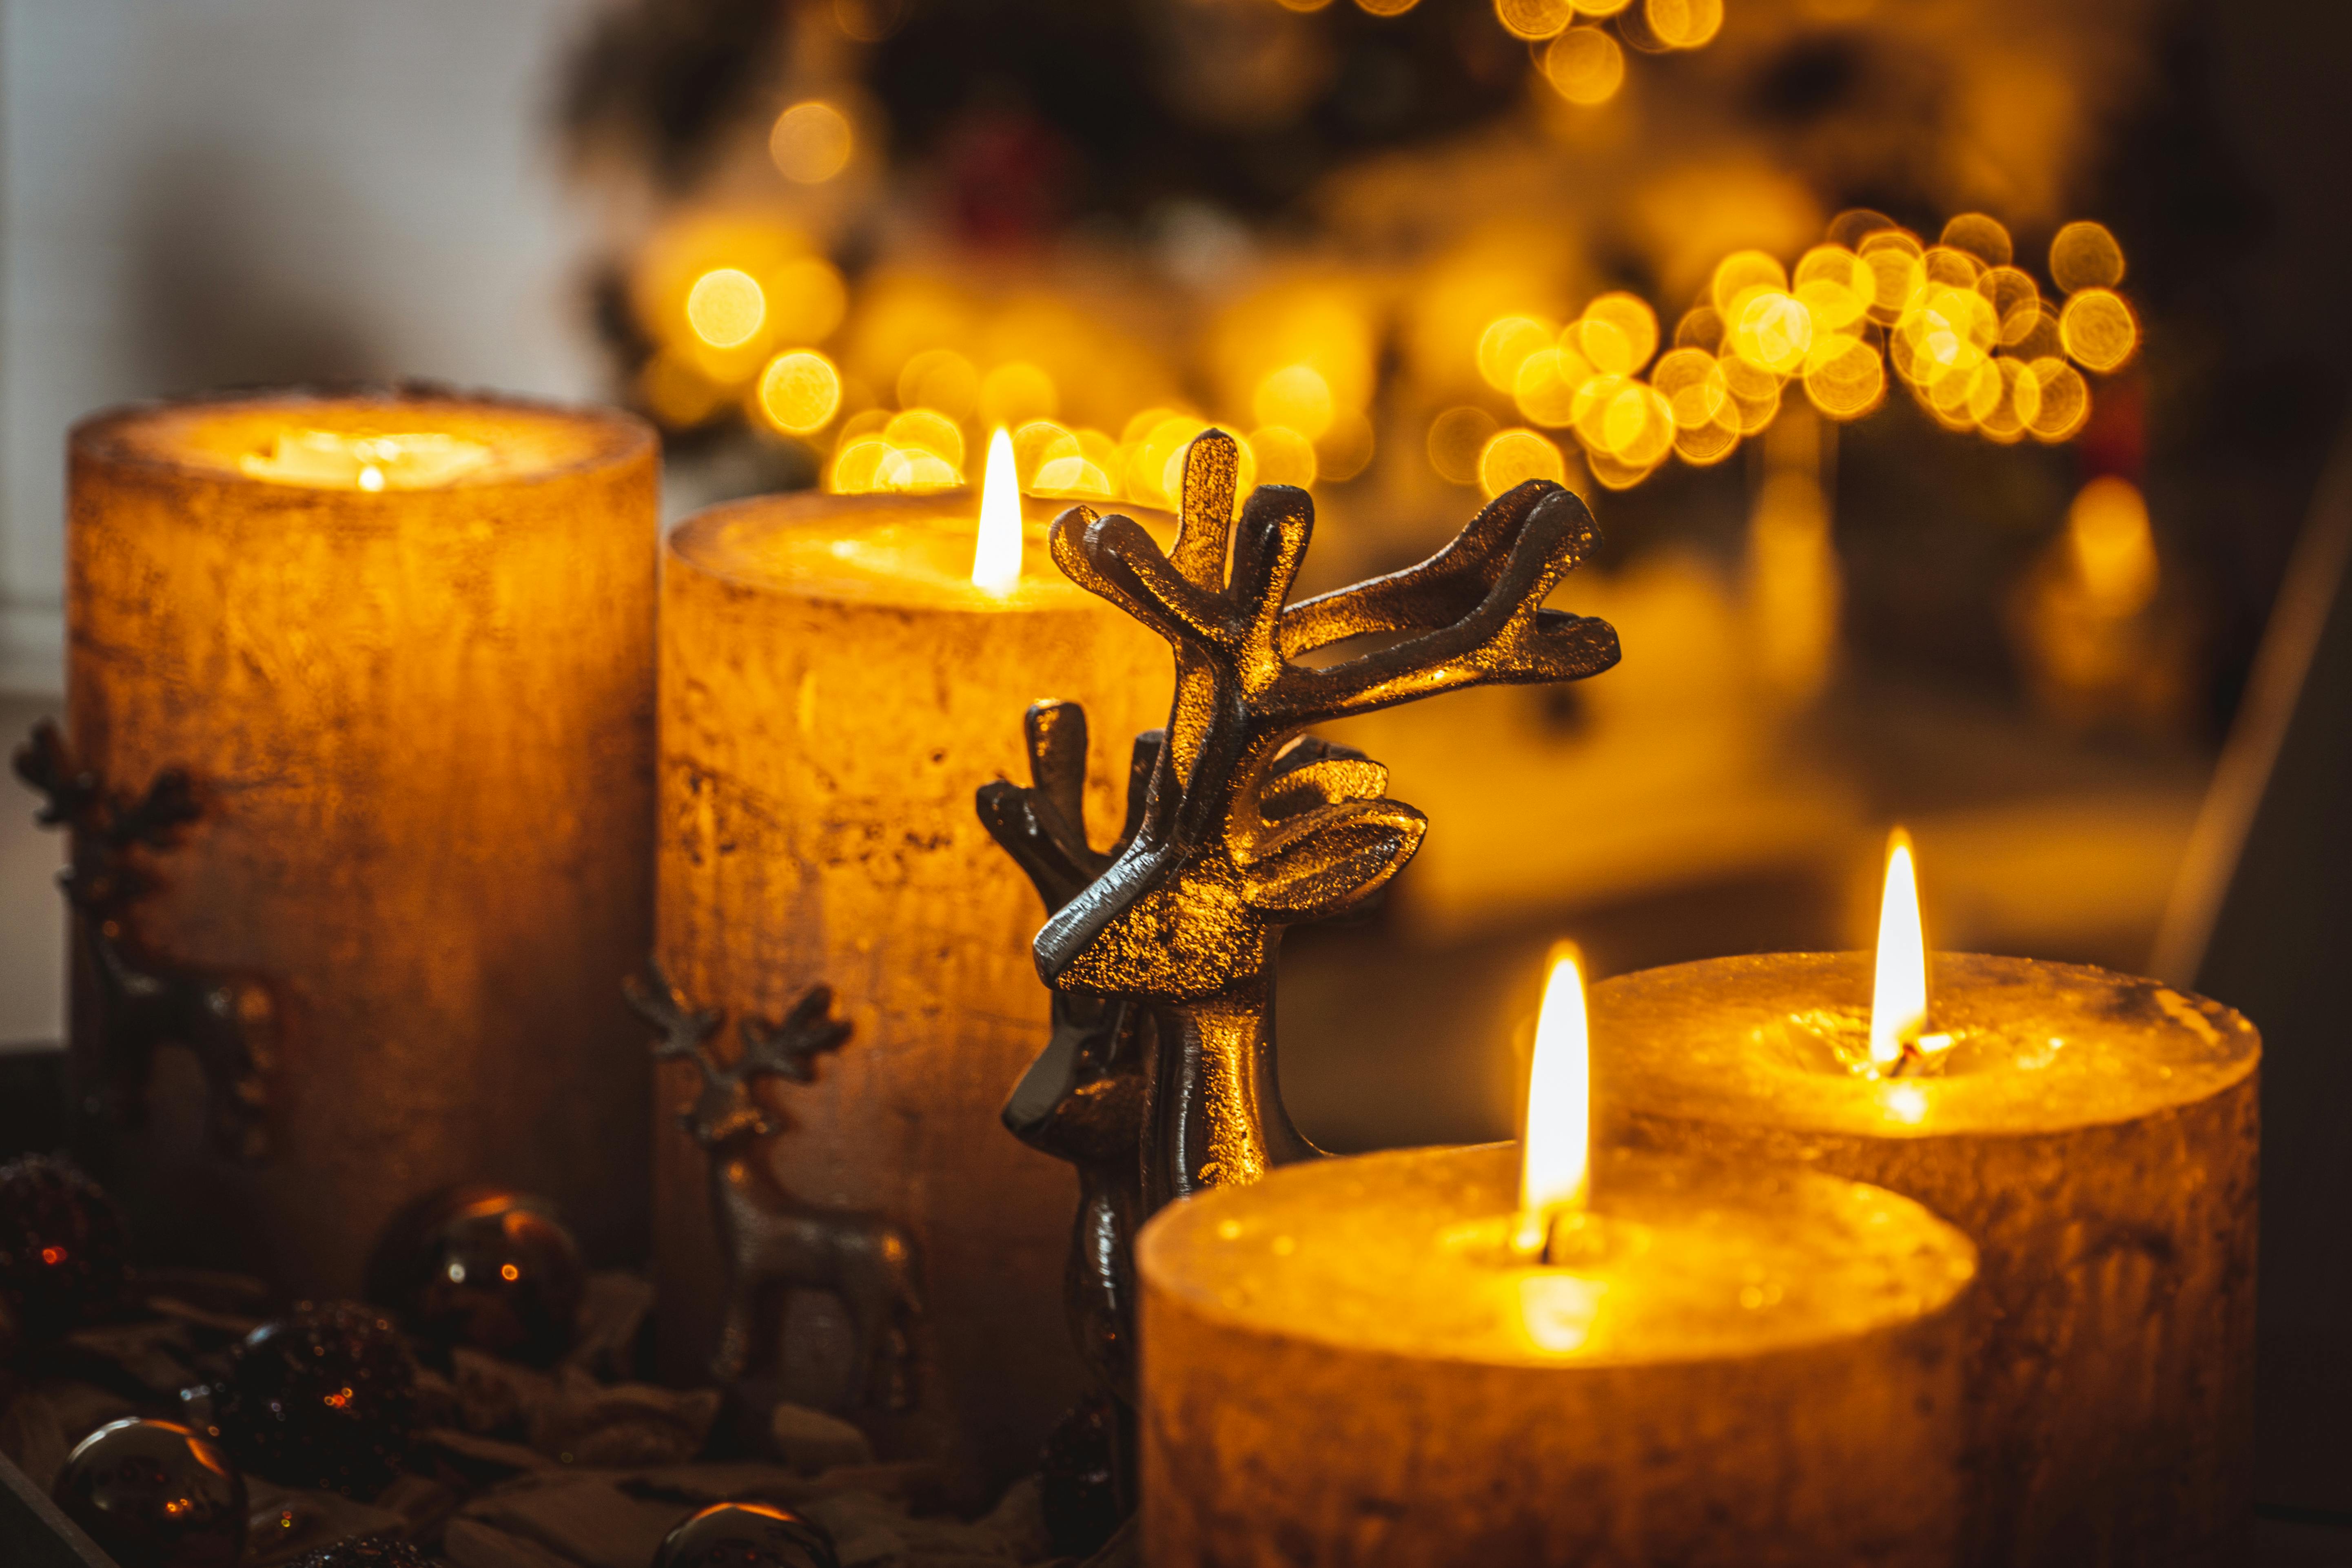 A close-up shot of lighted candles | Source: Pexels